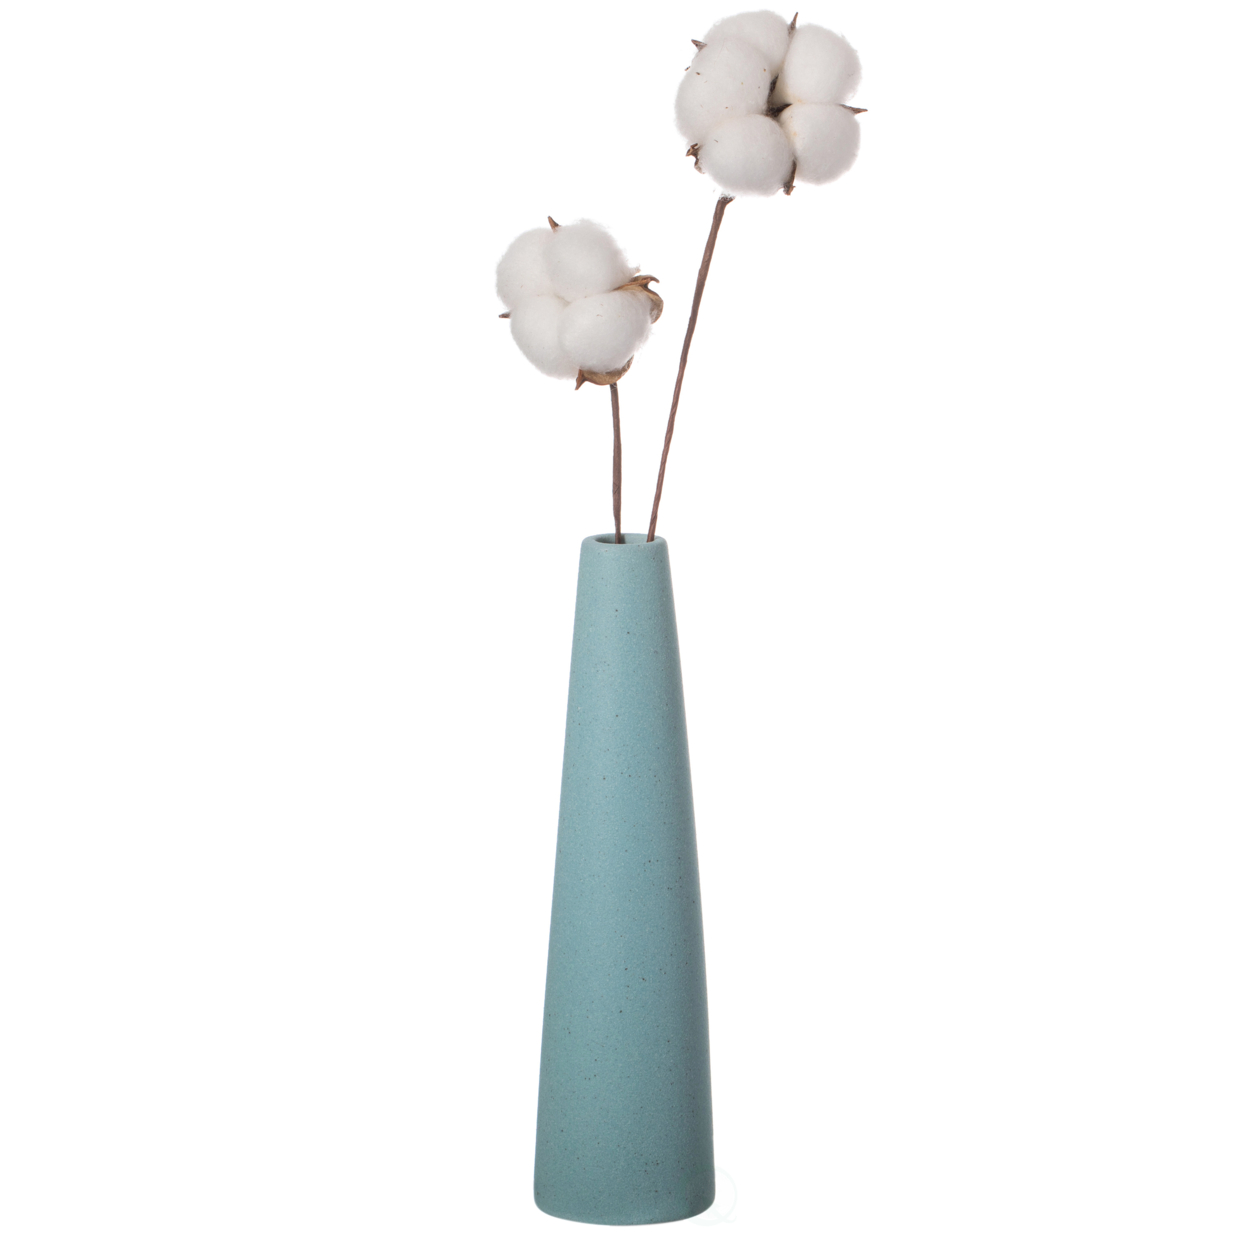 8 Inch Contemporary Ceramic Cone Shape Table Vase Modern Pastel Colored Flower Holder - Green